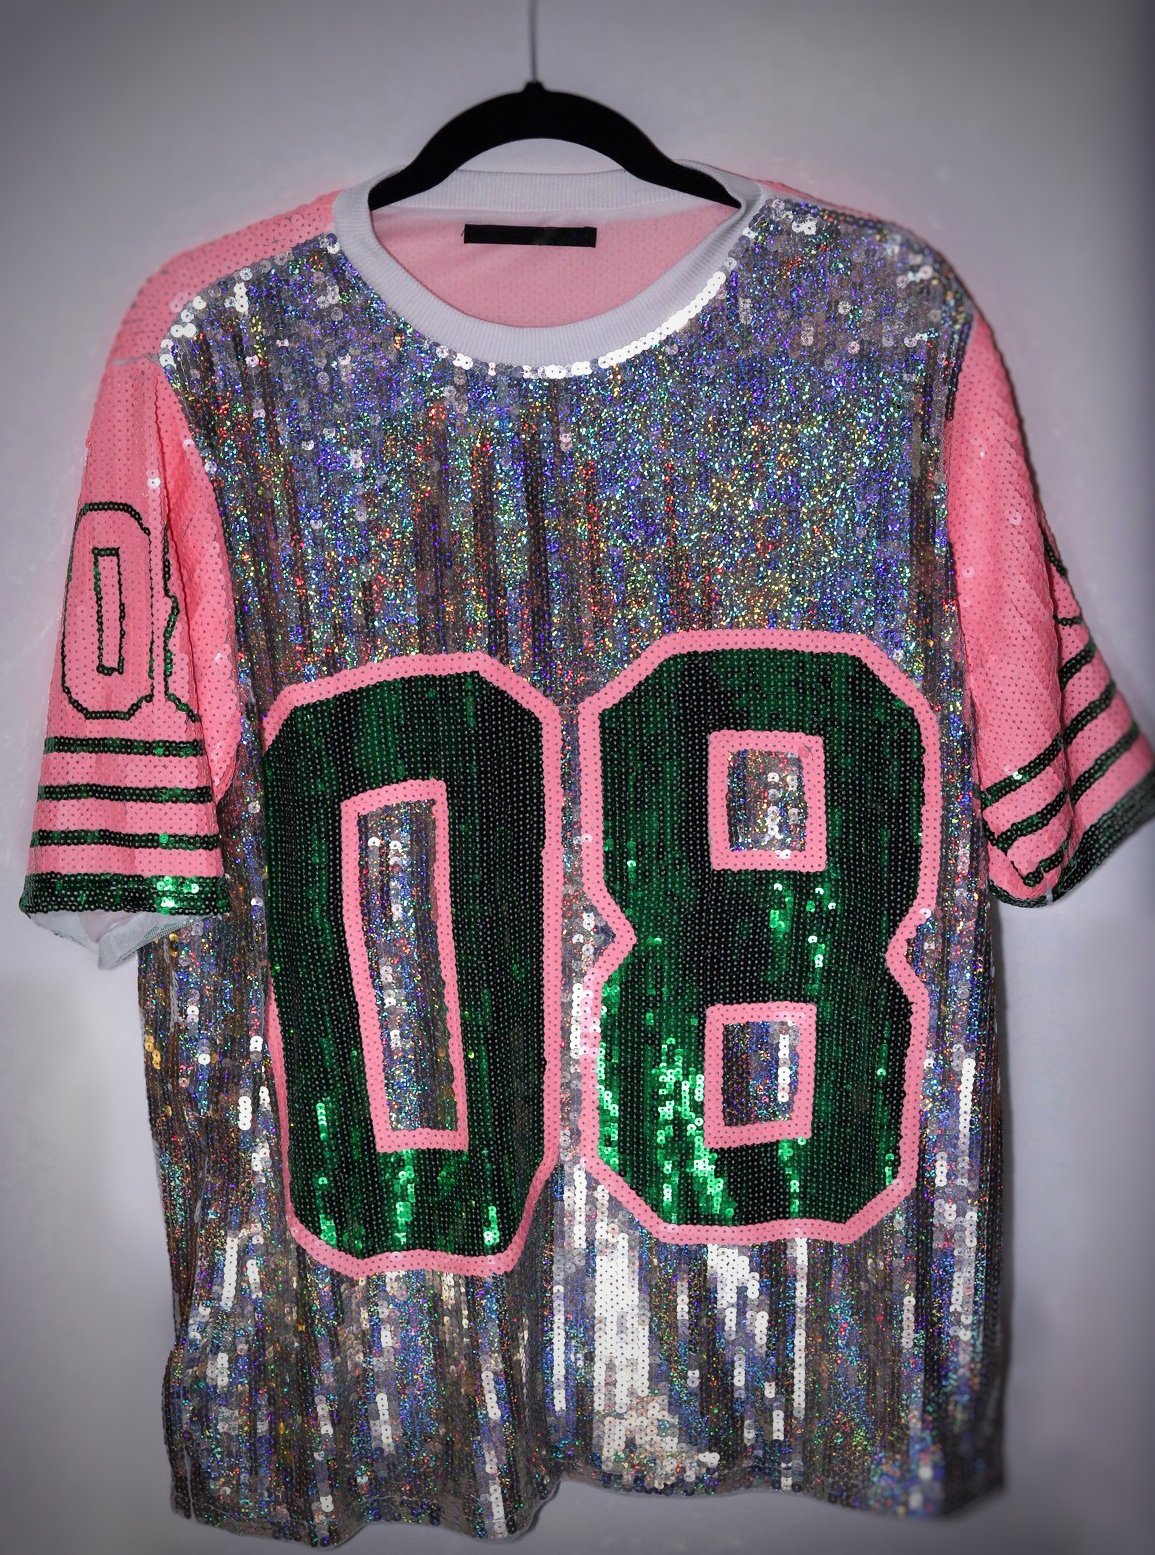 08 pink and green sequin dress